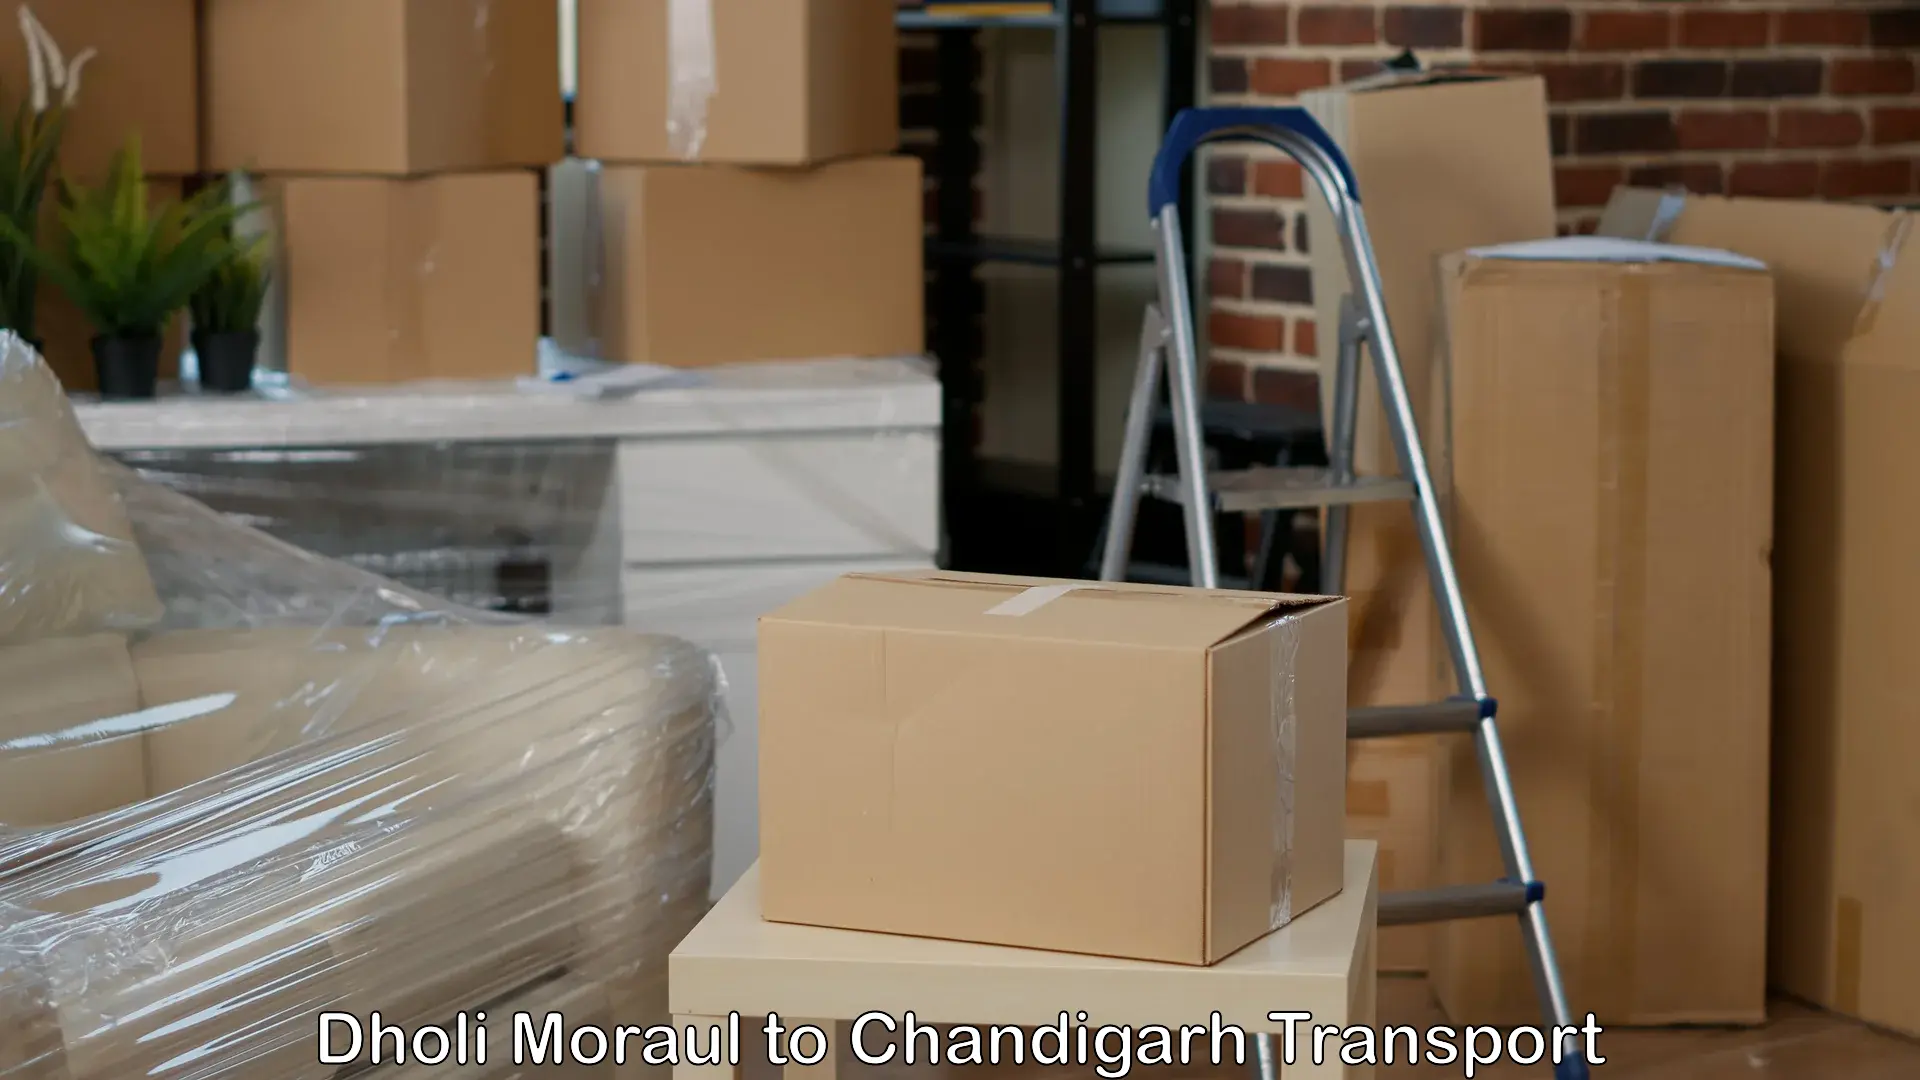 Cargo train transport services Dholi Moraul to Chandigarh